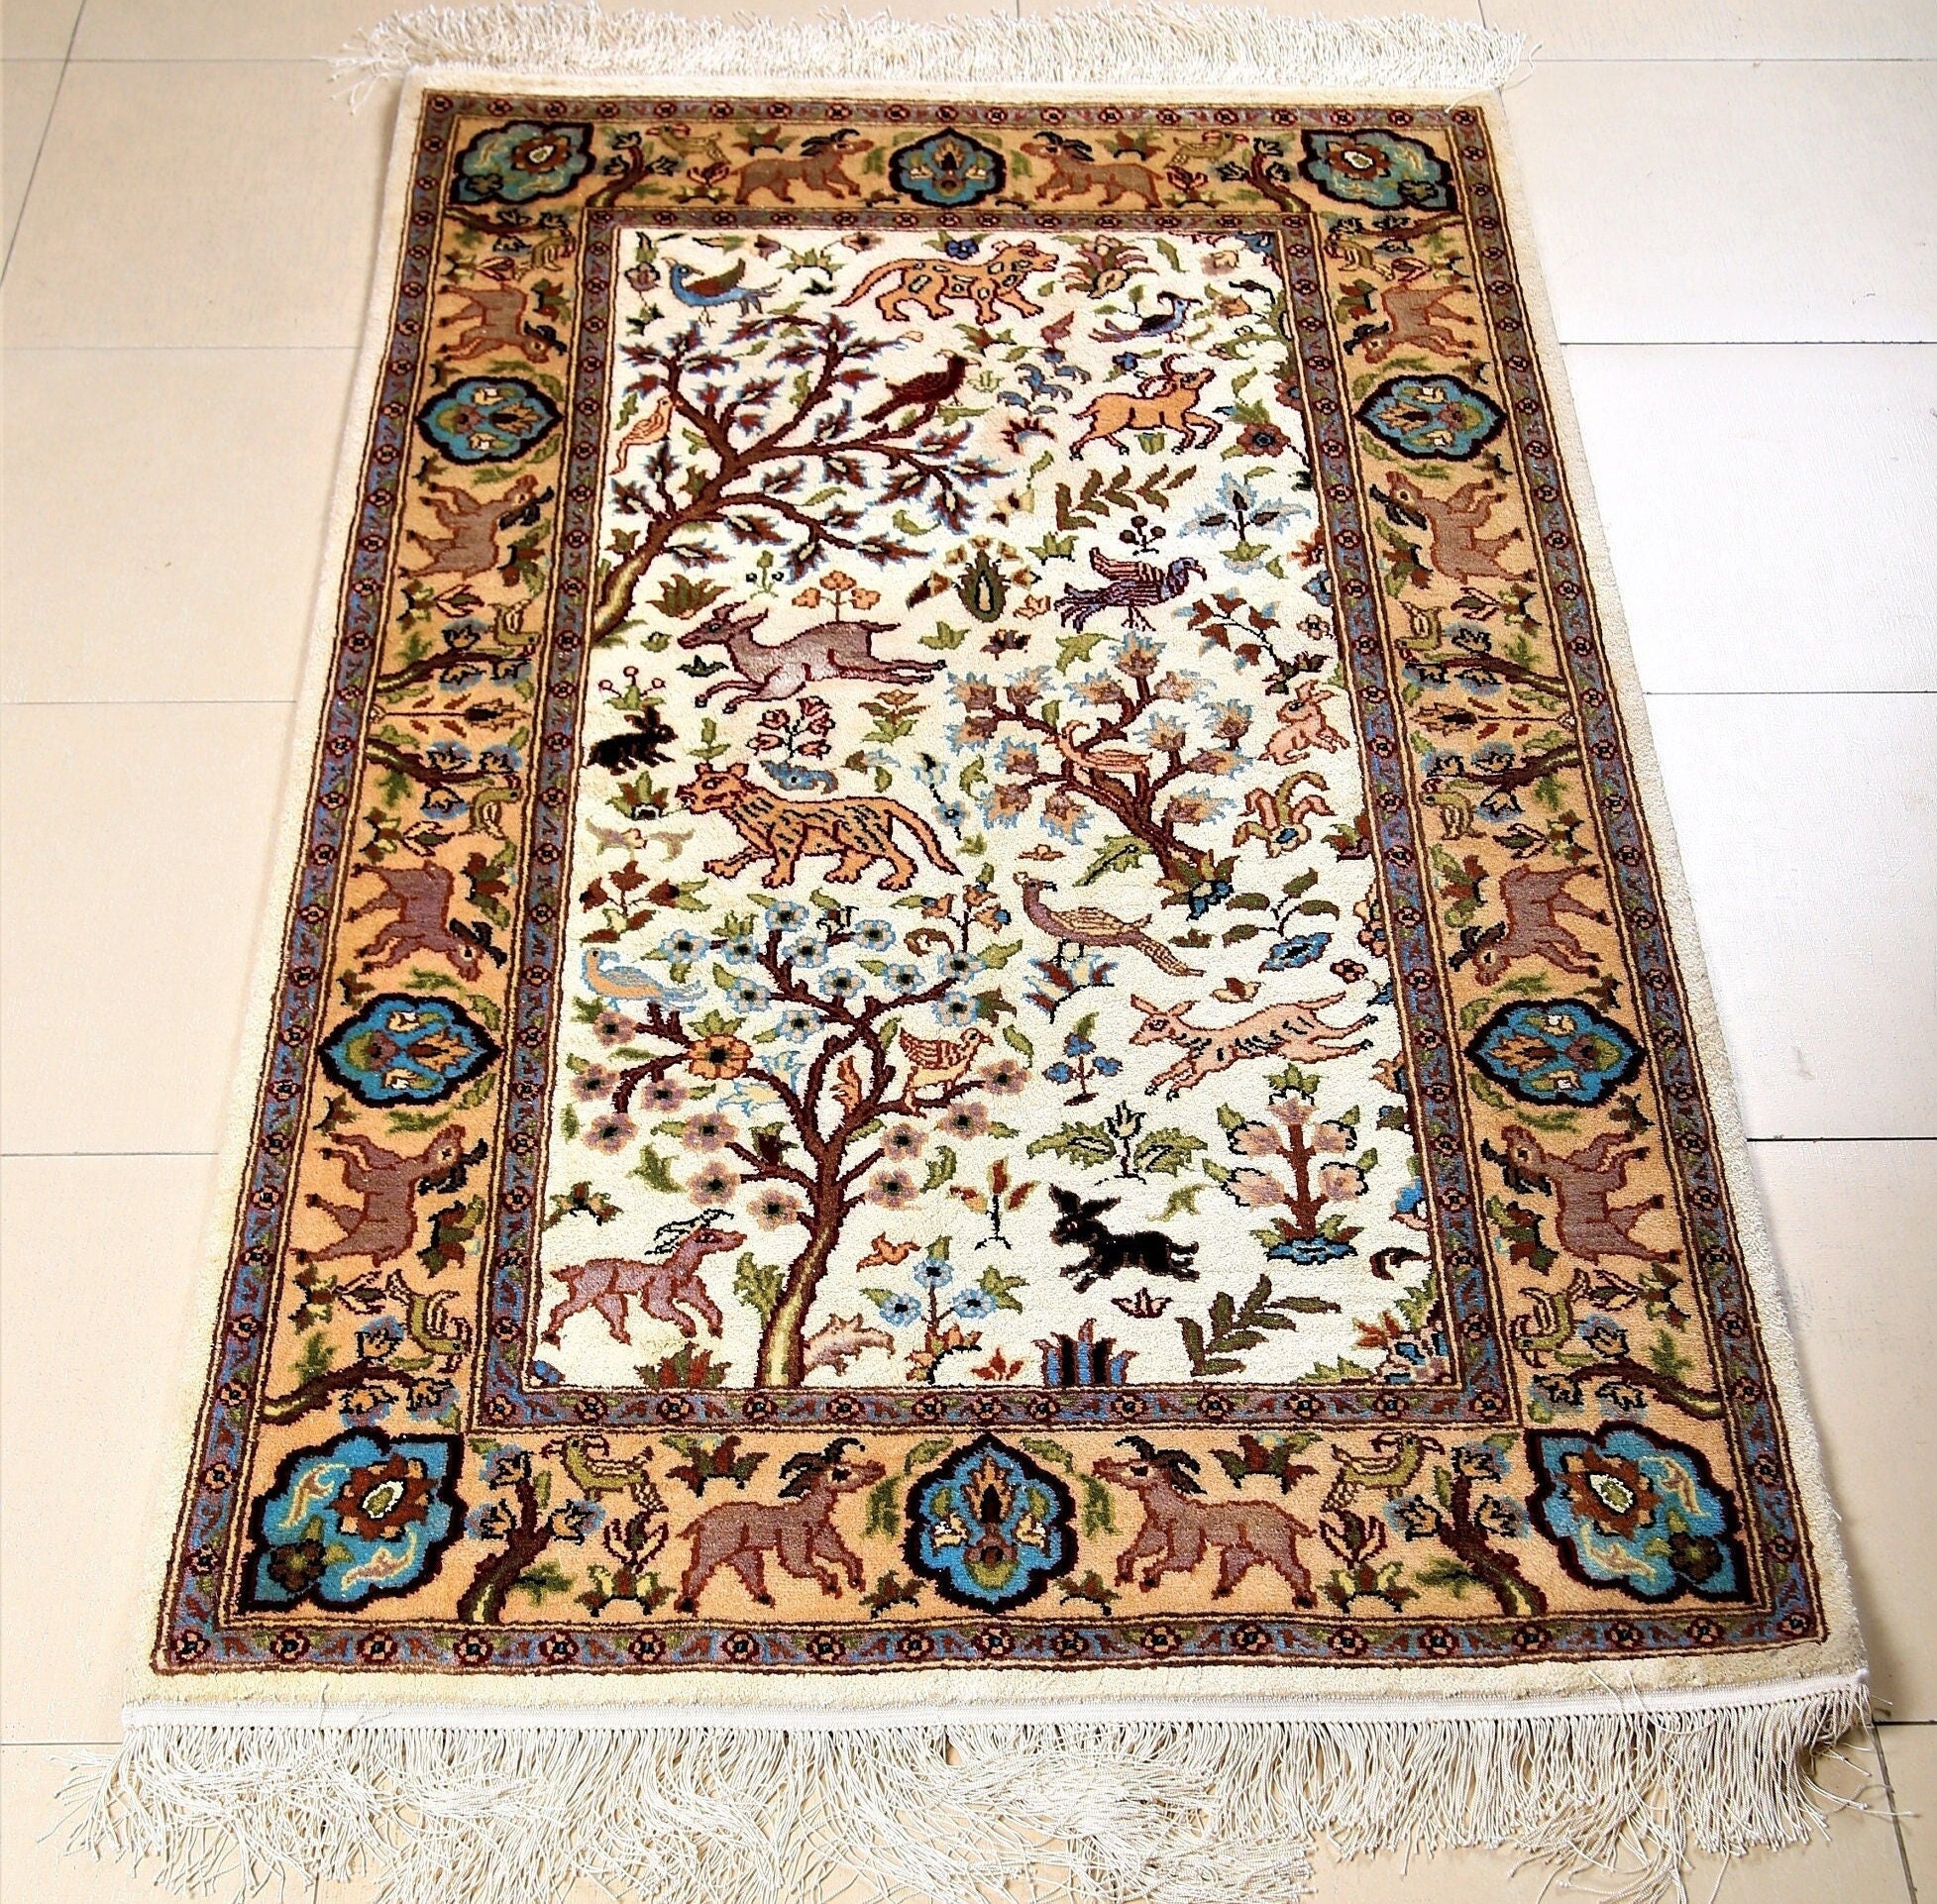 Pictorial Home Decor Hand-Knotted Area Rug Oriental Wool Rug 3'3x4' ft  -B20797